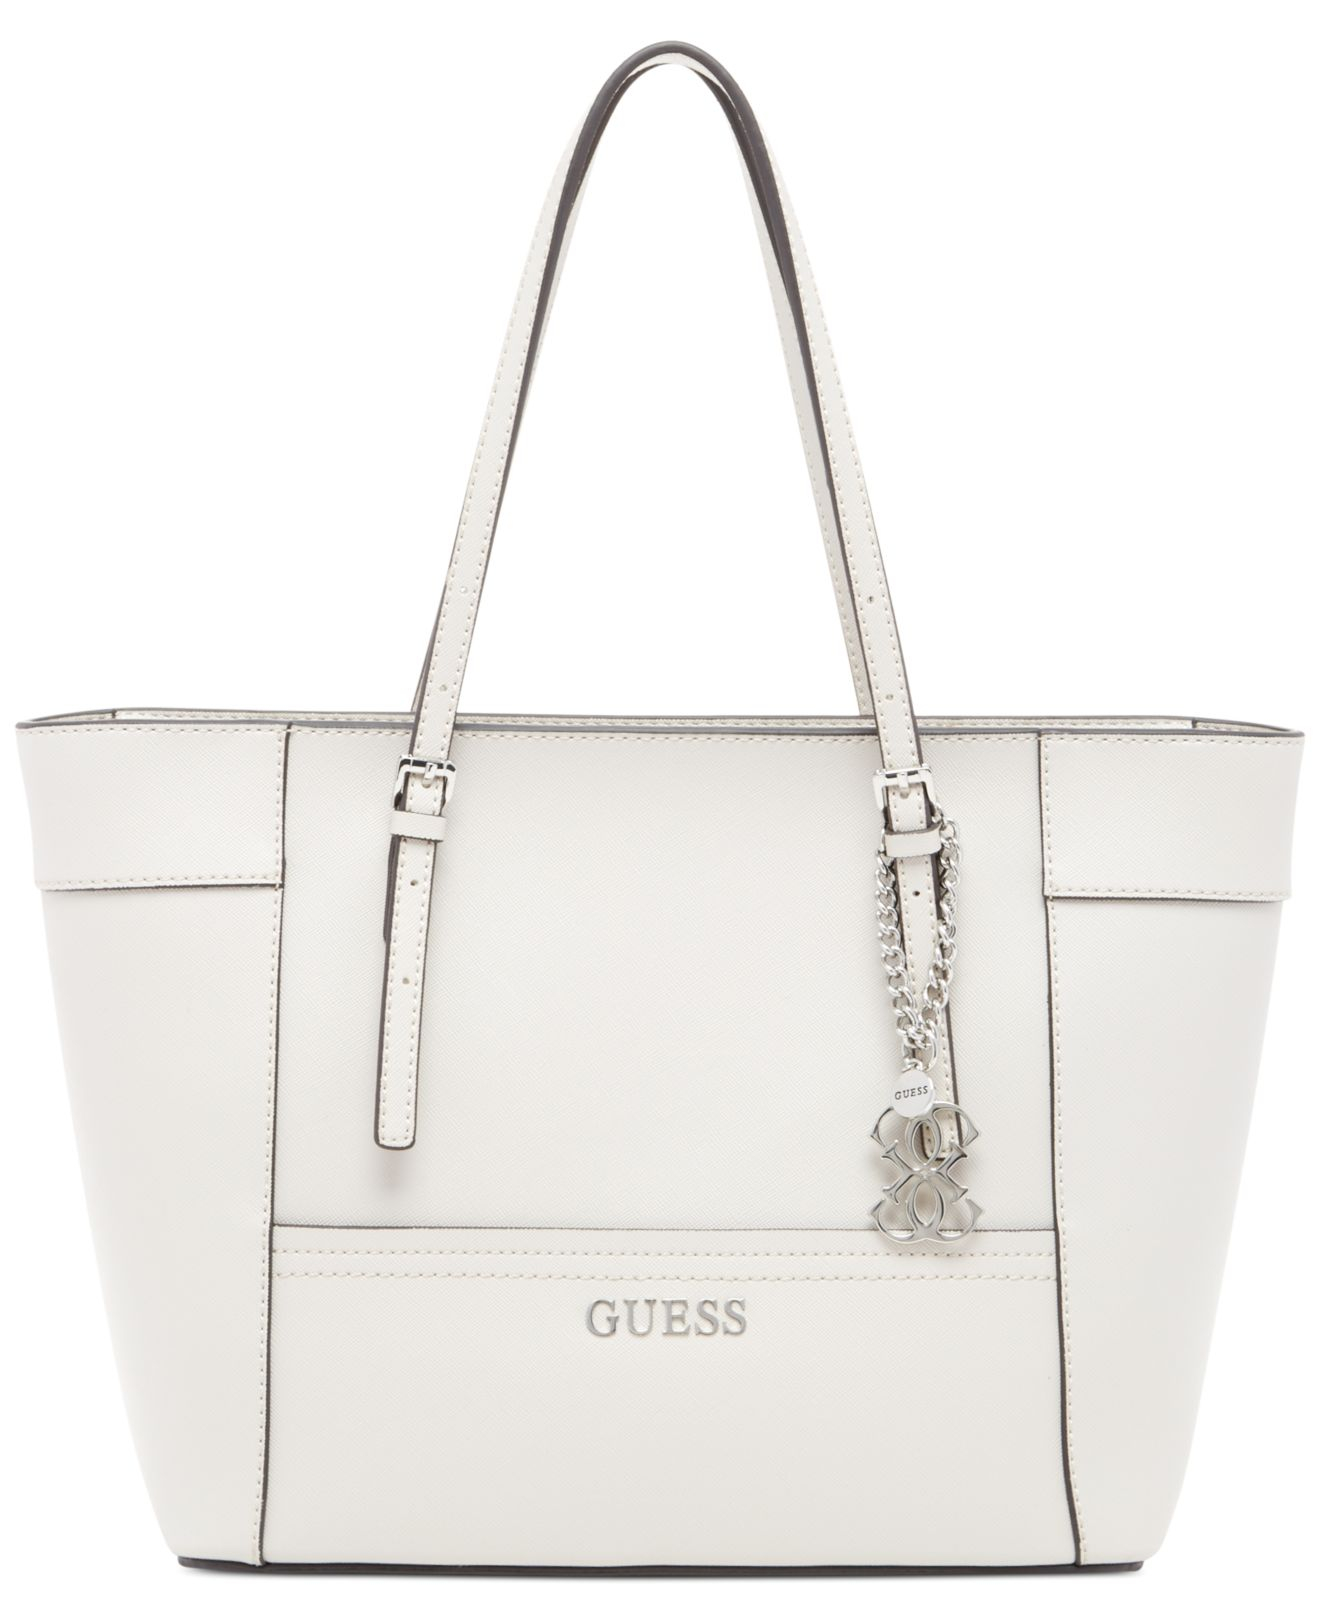 Lyst - Guess Delaney Small Classic Tote in White